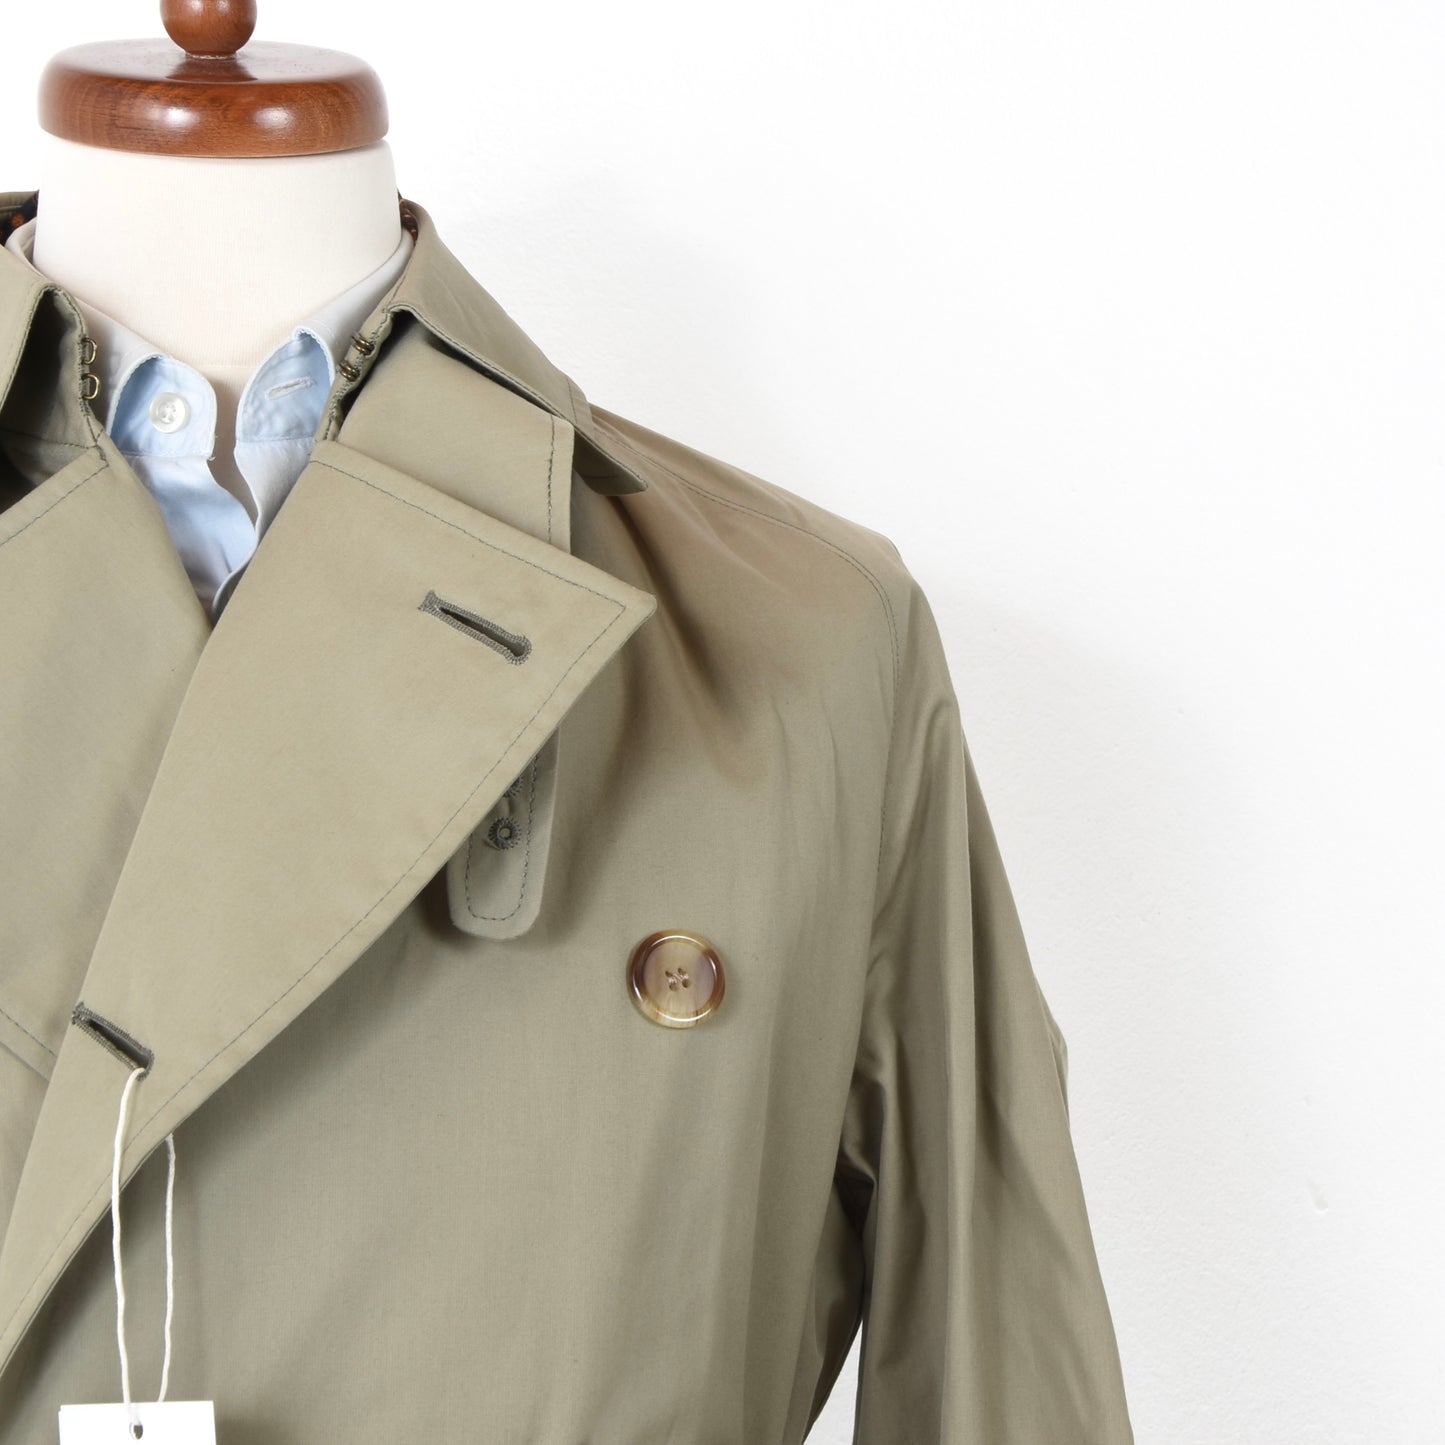 Grenfell Double-Breasted Trench Coat Size 34"/86cm - Tan/Beige